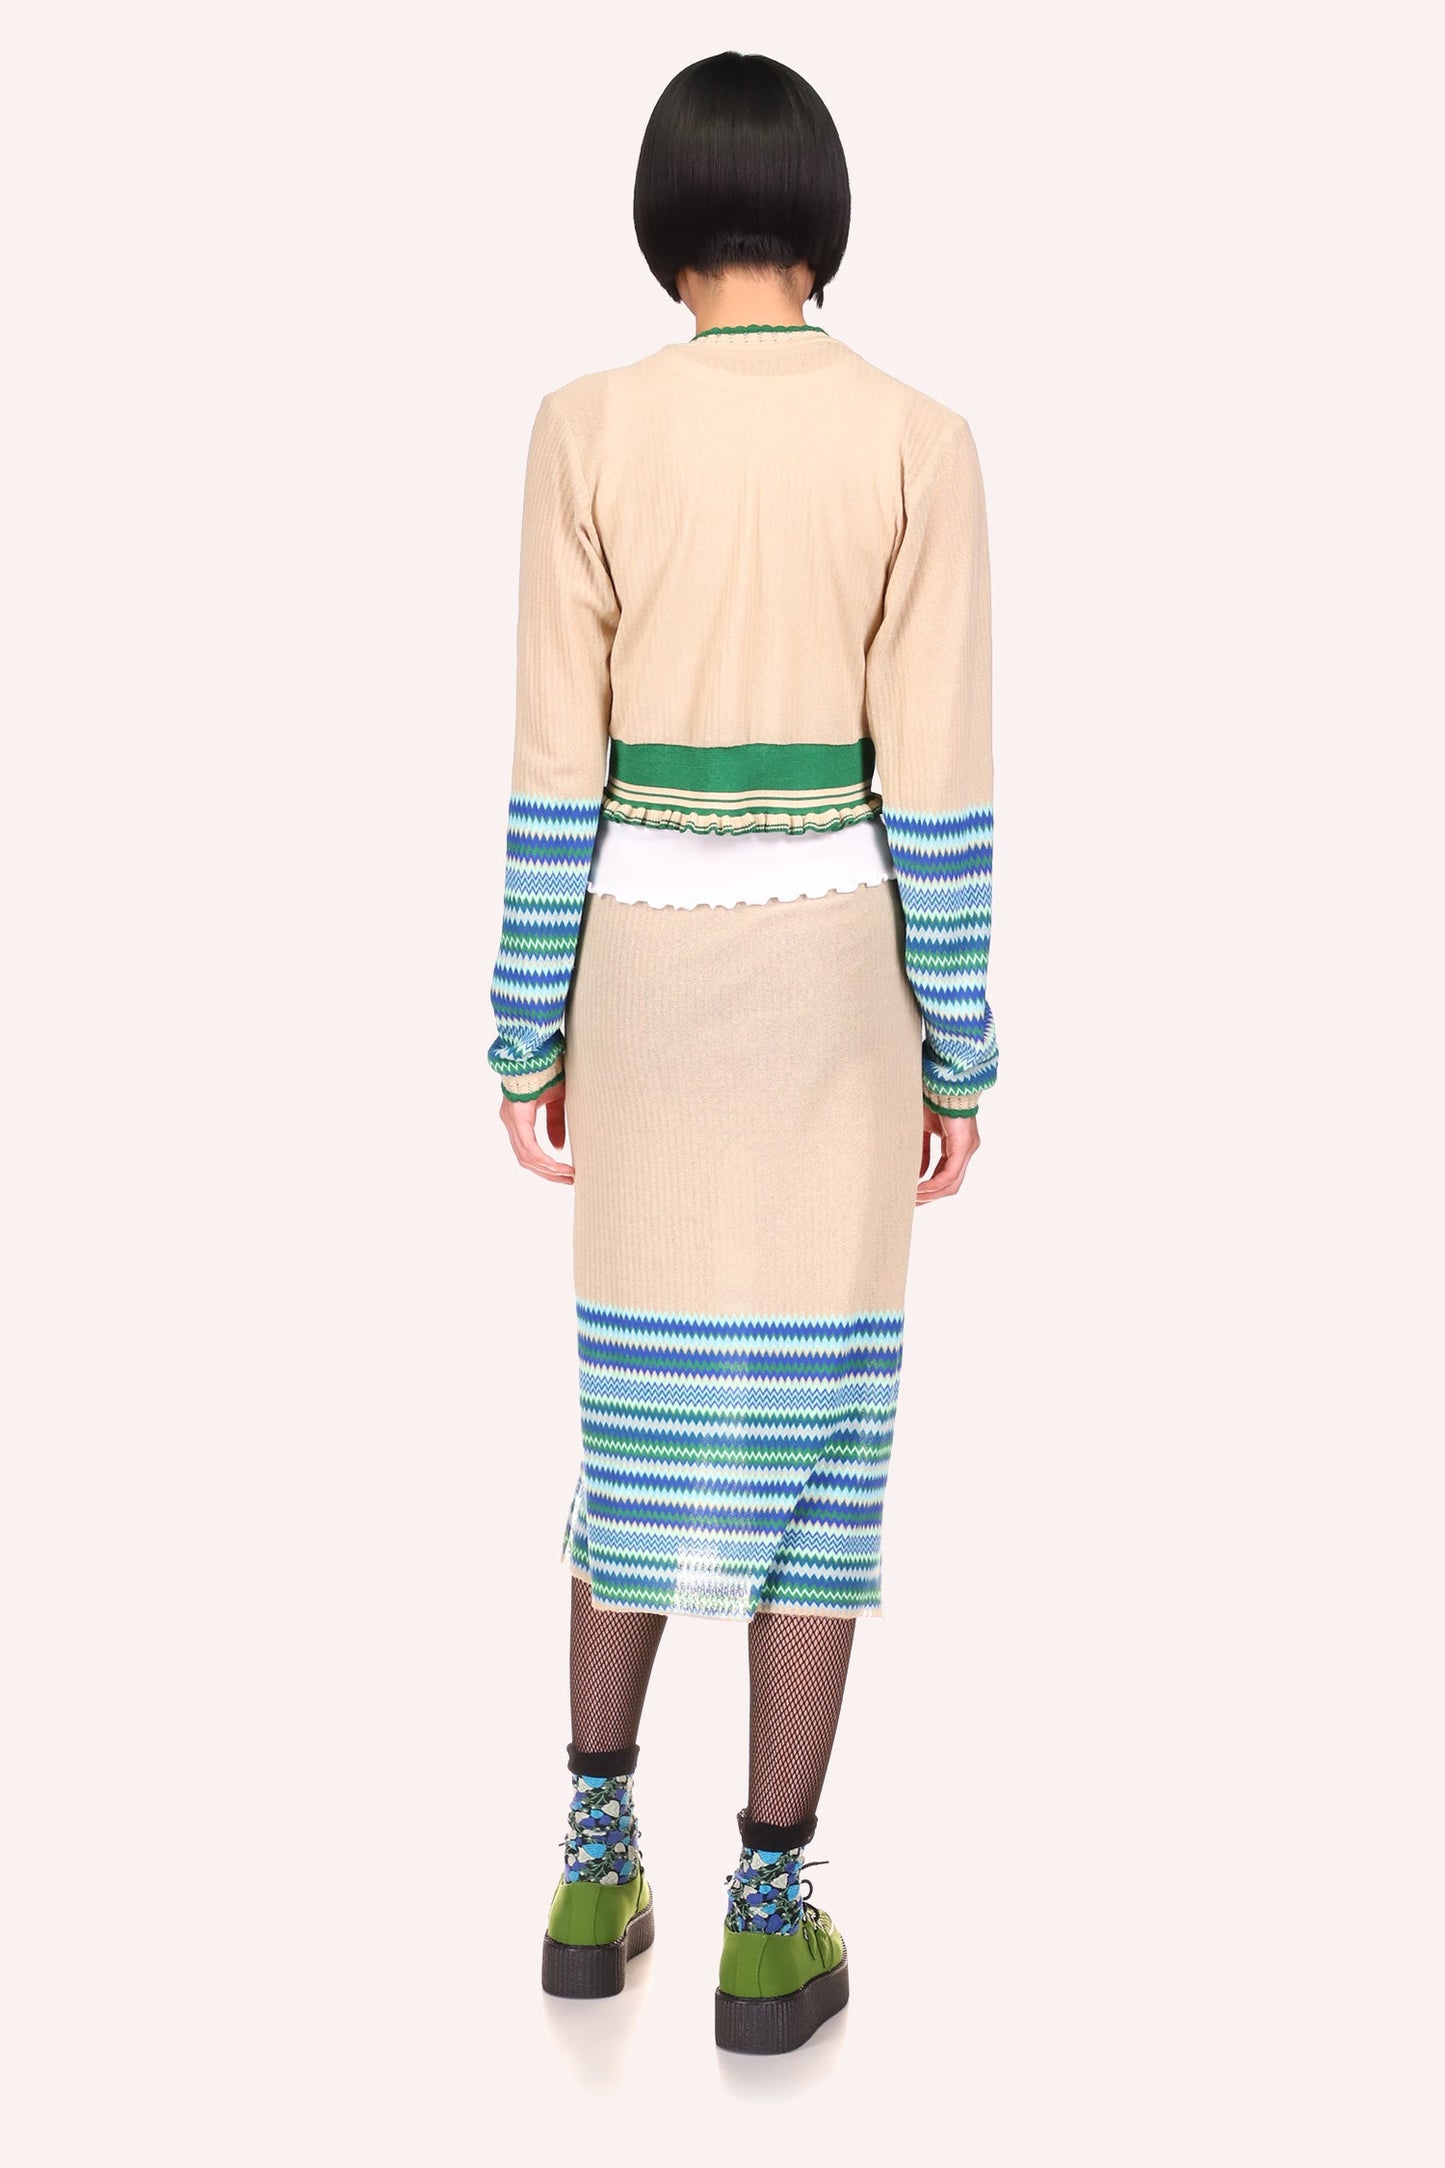 Tonal Zigzag Skirt Cornflower, the skirt highlights the curves of your body